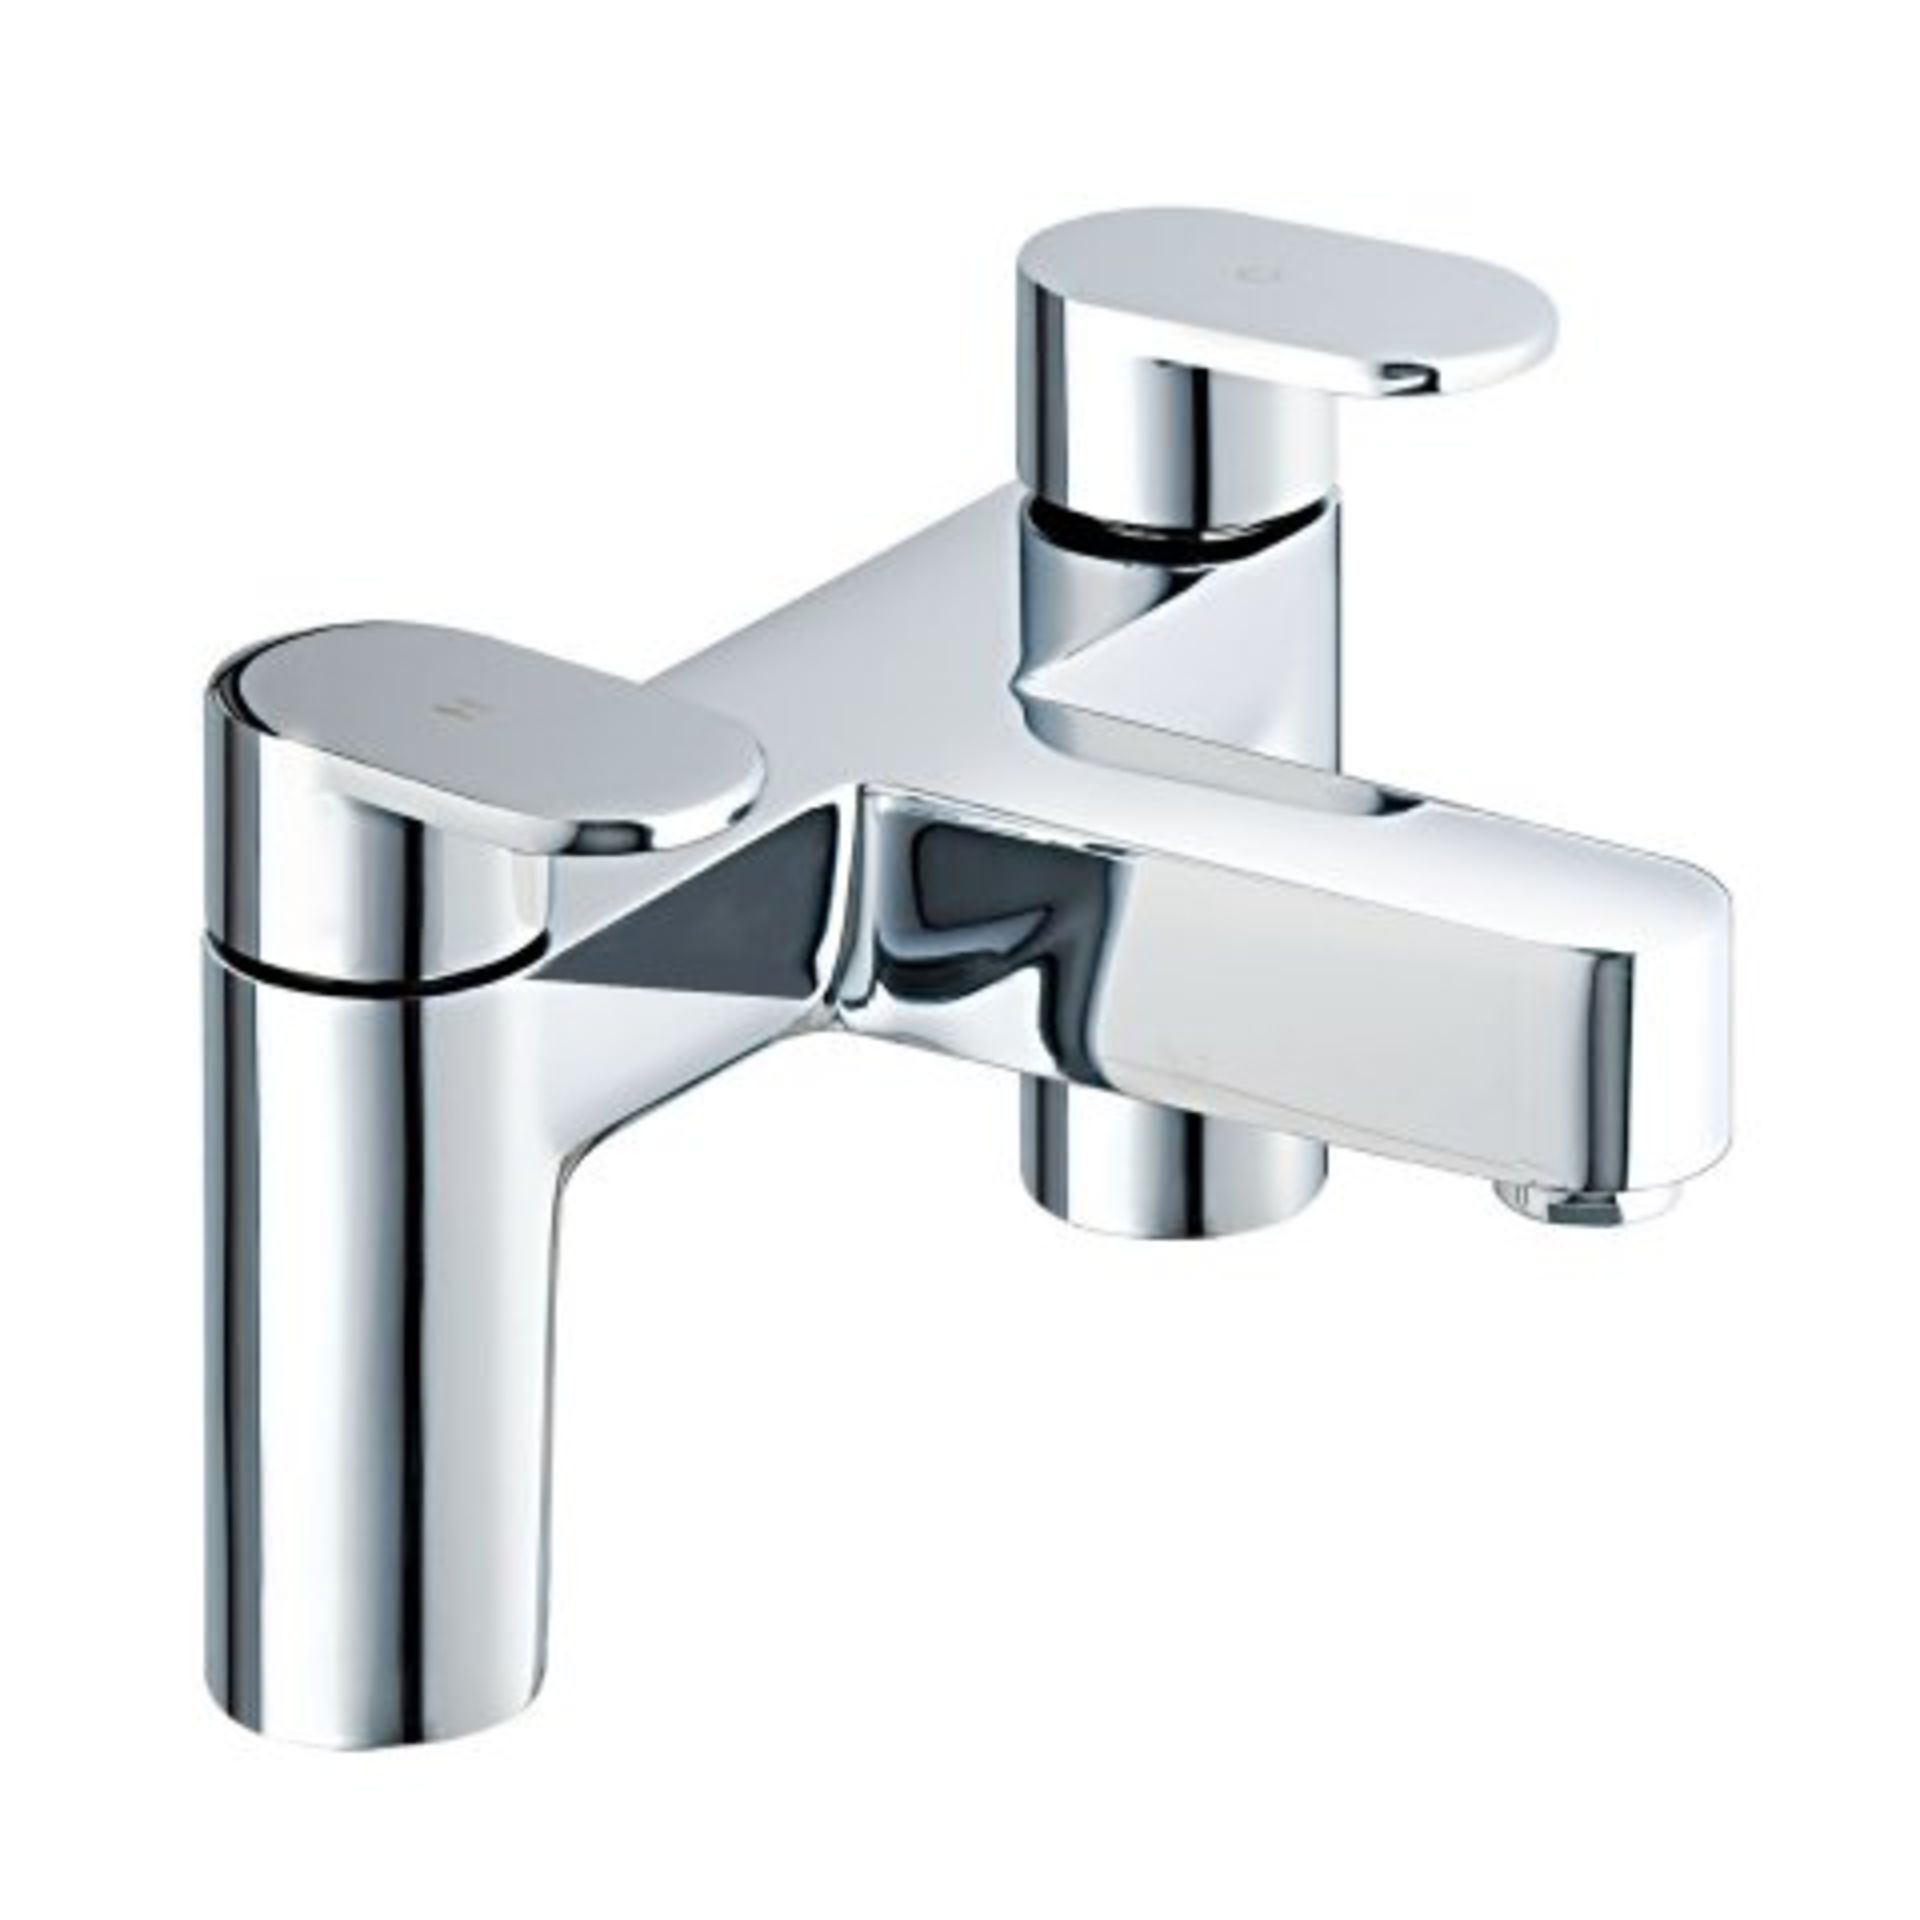 (T37) Boll Bath Filler Mixer Tap. RRP £140.39._x00D__x00D_Presenting a contemporary design, this - Image 4 of 4